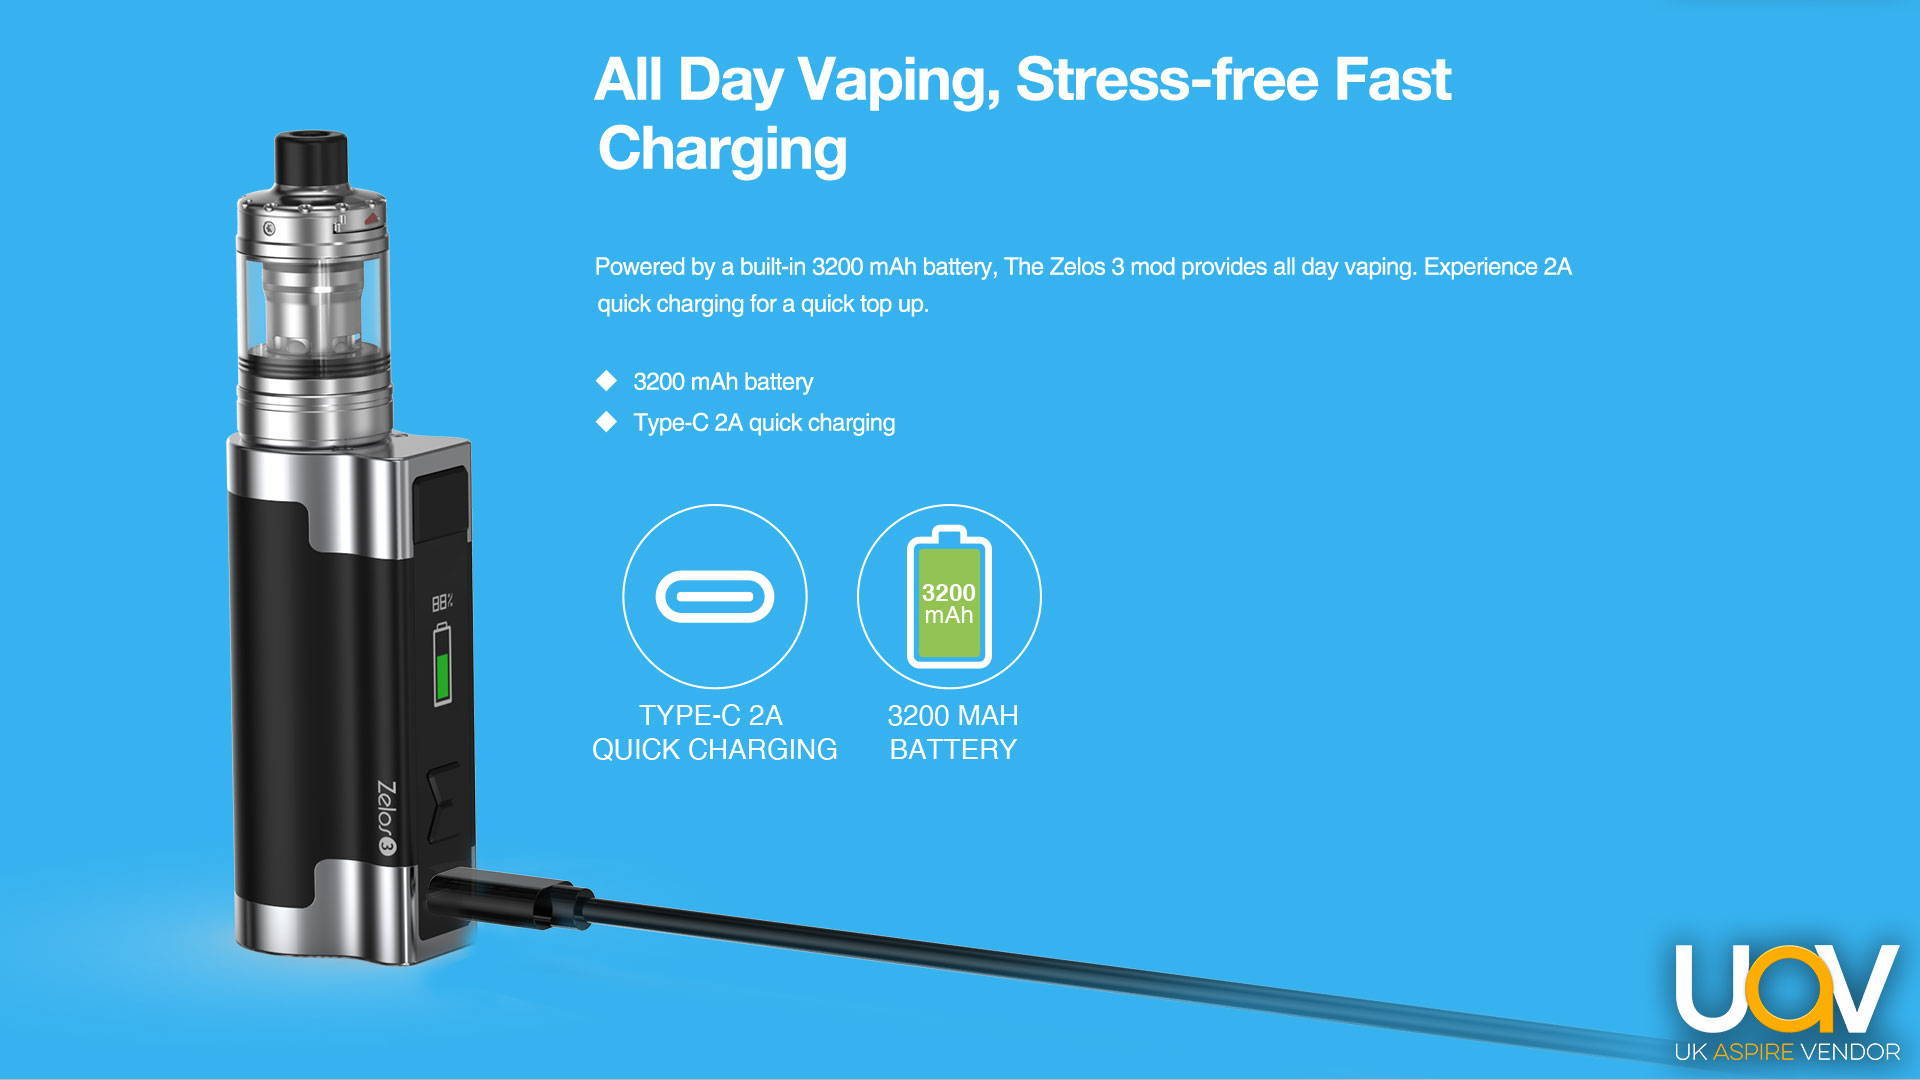 All Day Vaping, Stress-free Fast Charging  Powered by a built-in 3200 mAh battery, The Zelos 3 mod provides all day vaping. Experience 2A quick charging for a quick top up.  ◆	3200 mAh battery ◆	Type-C 2A quick charging